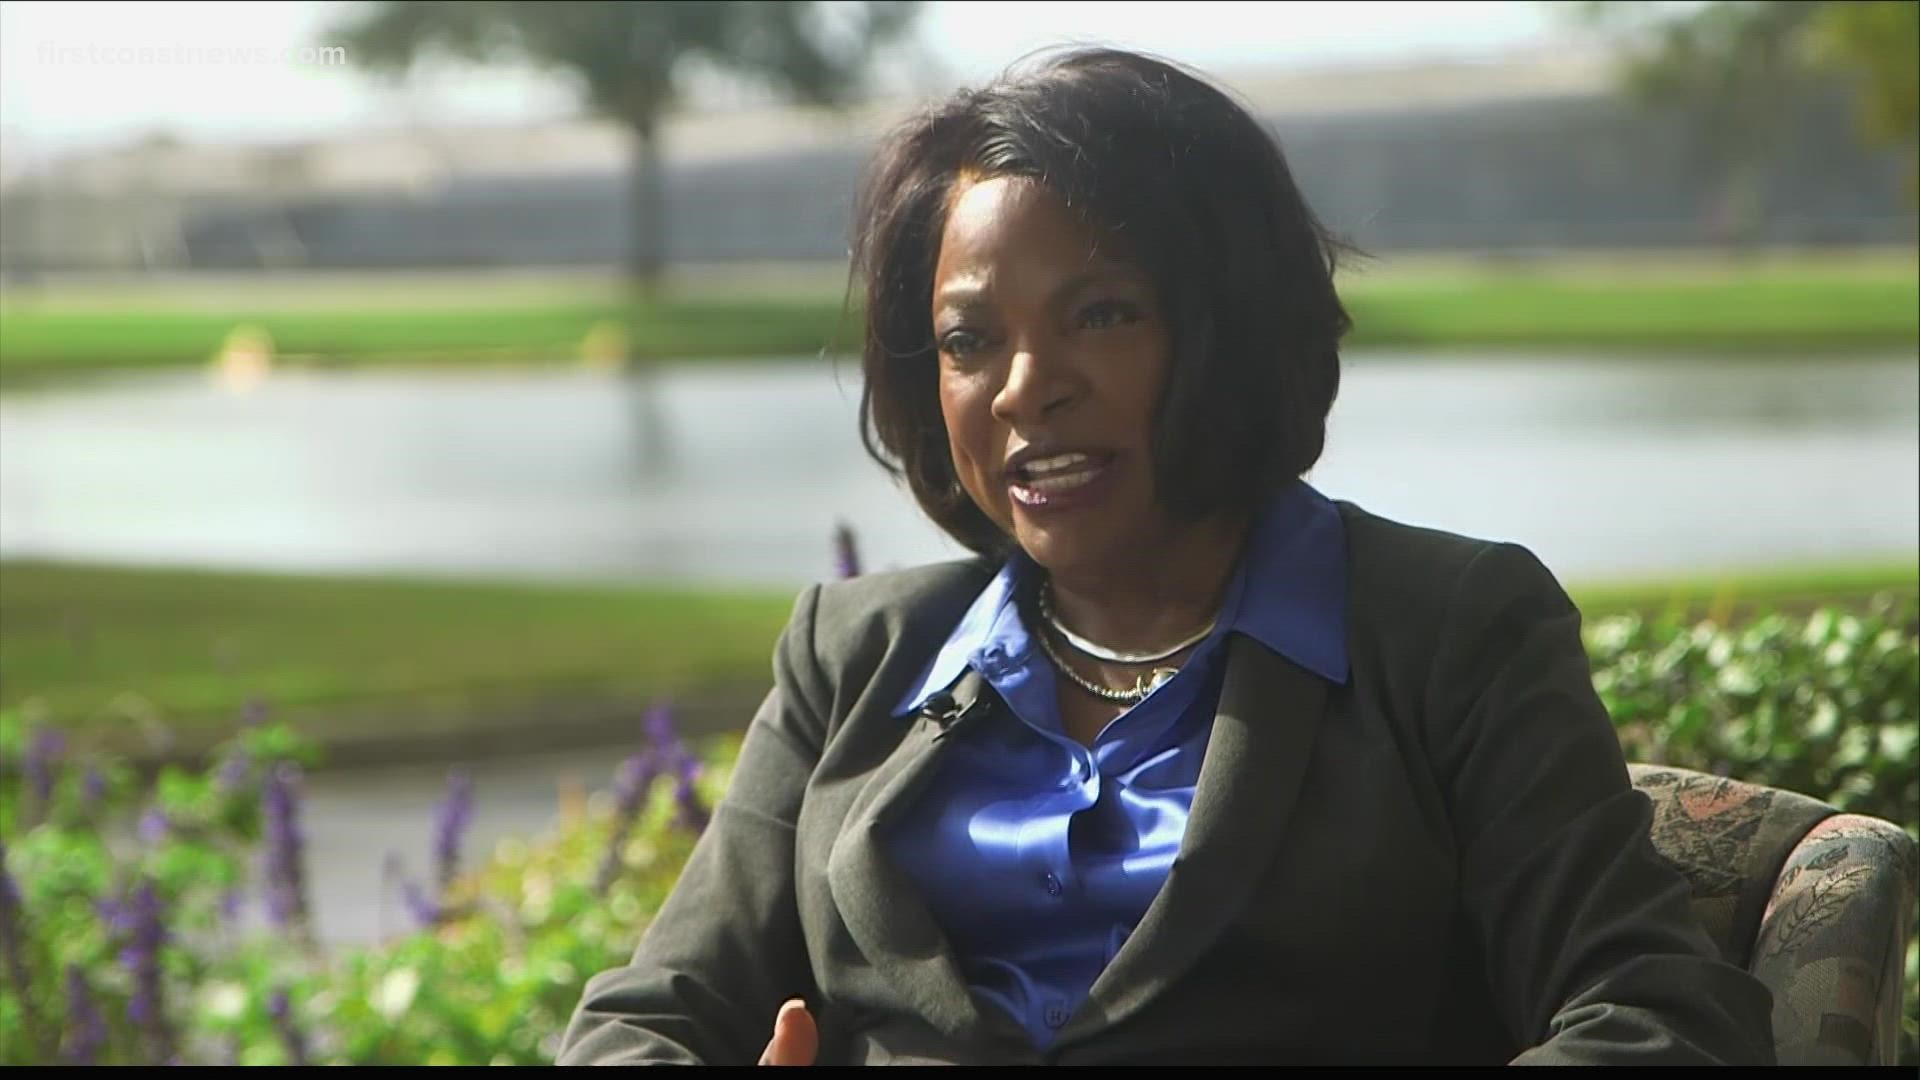 Congresswoman Val Demings, a Jacksonville native and the first Black woman to head the Orlando Police Department, is running for Sen. Marco Rubio's seat.